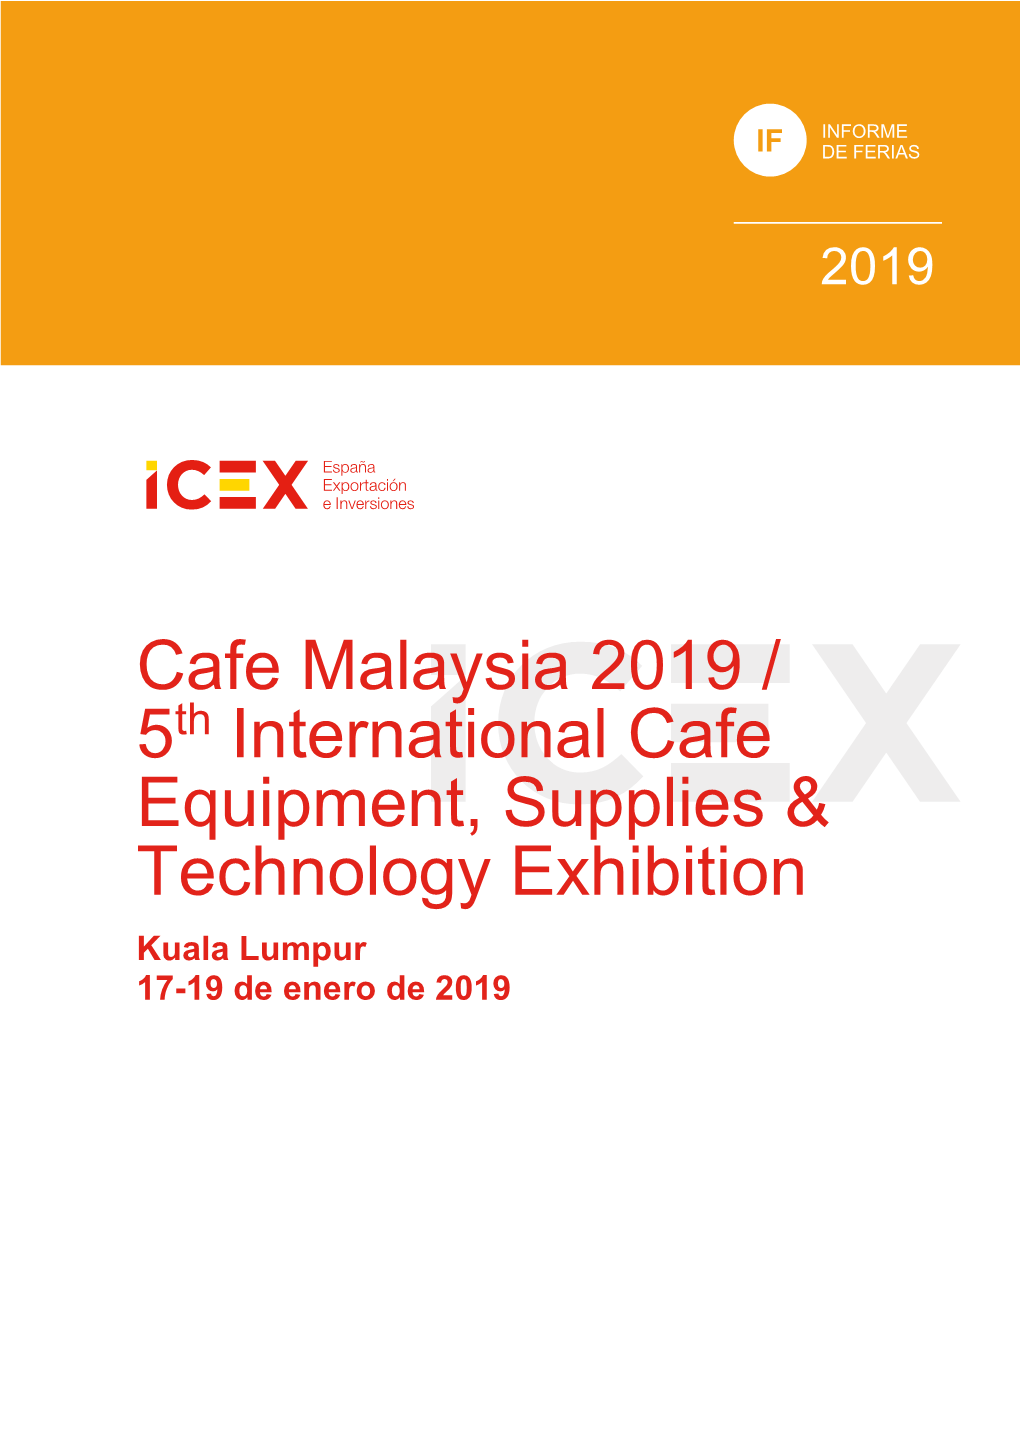 Cafe Malaysia 2019 / 5 International Cafe Equipment, Supplies & Technology Exhibition